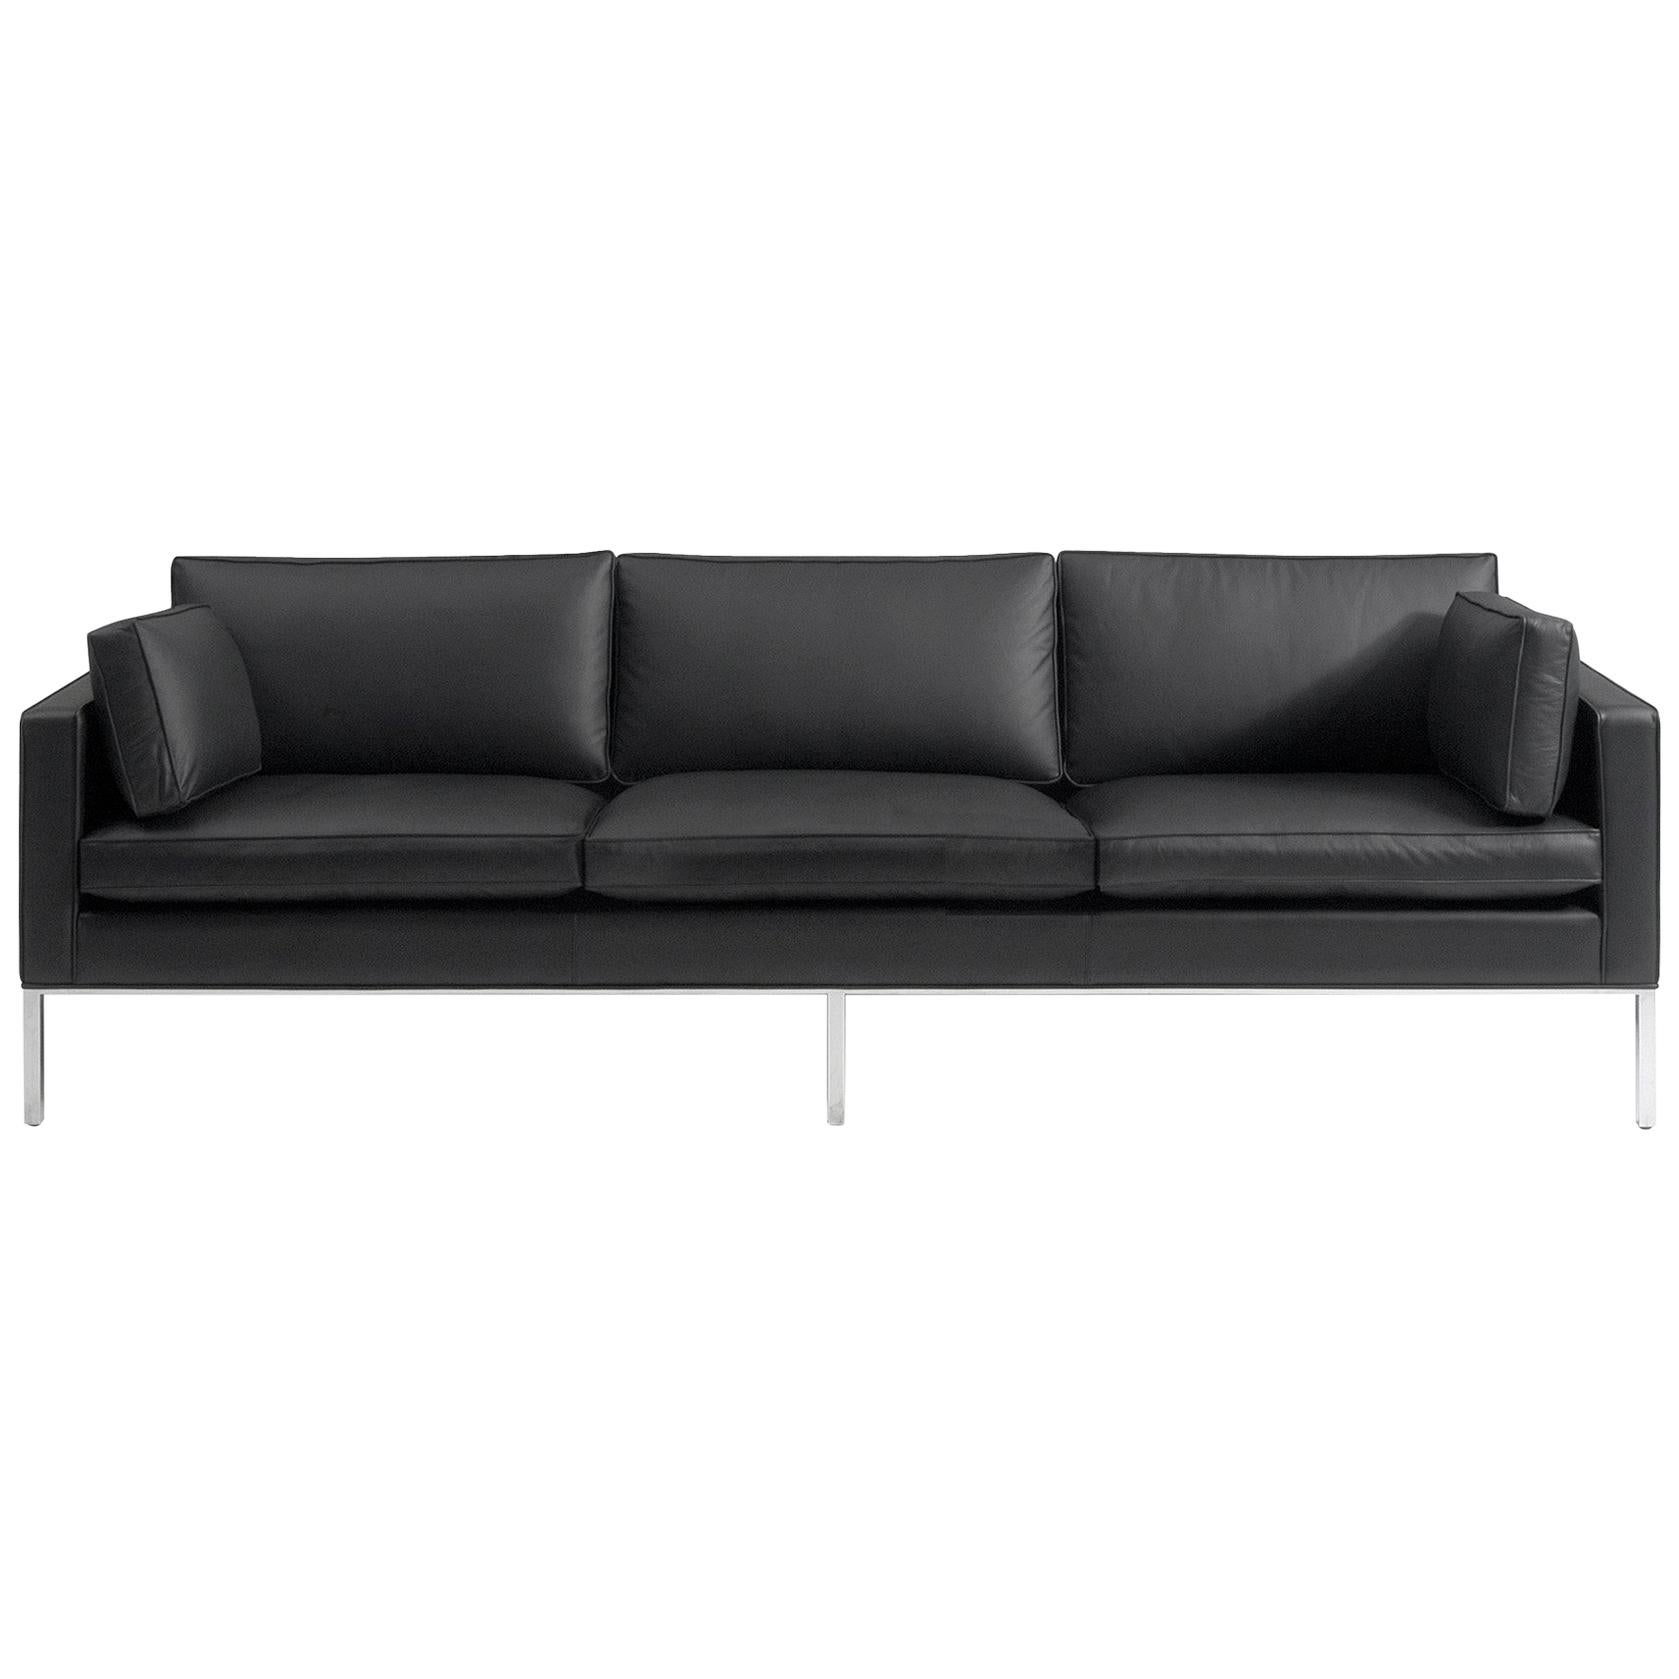 Customizable Artifort 905 Sofa in leather by Artifort Design Group For Sale